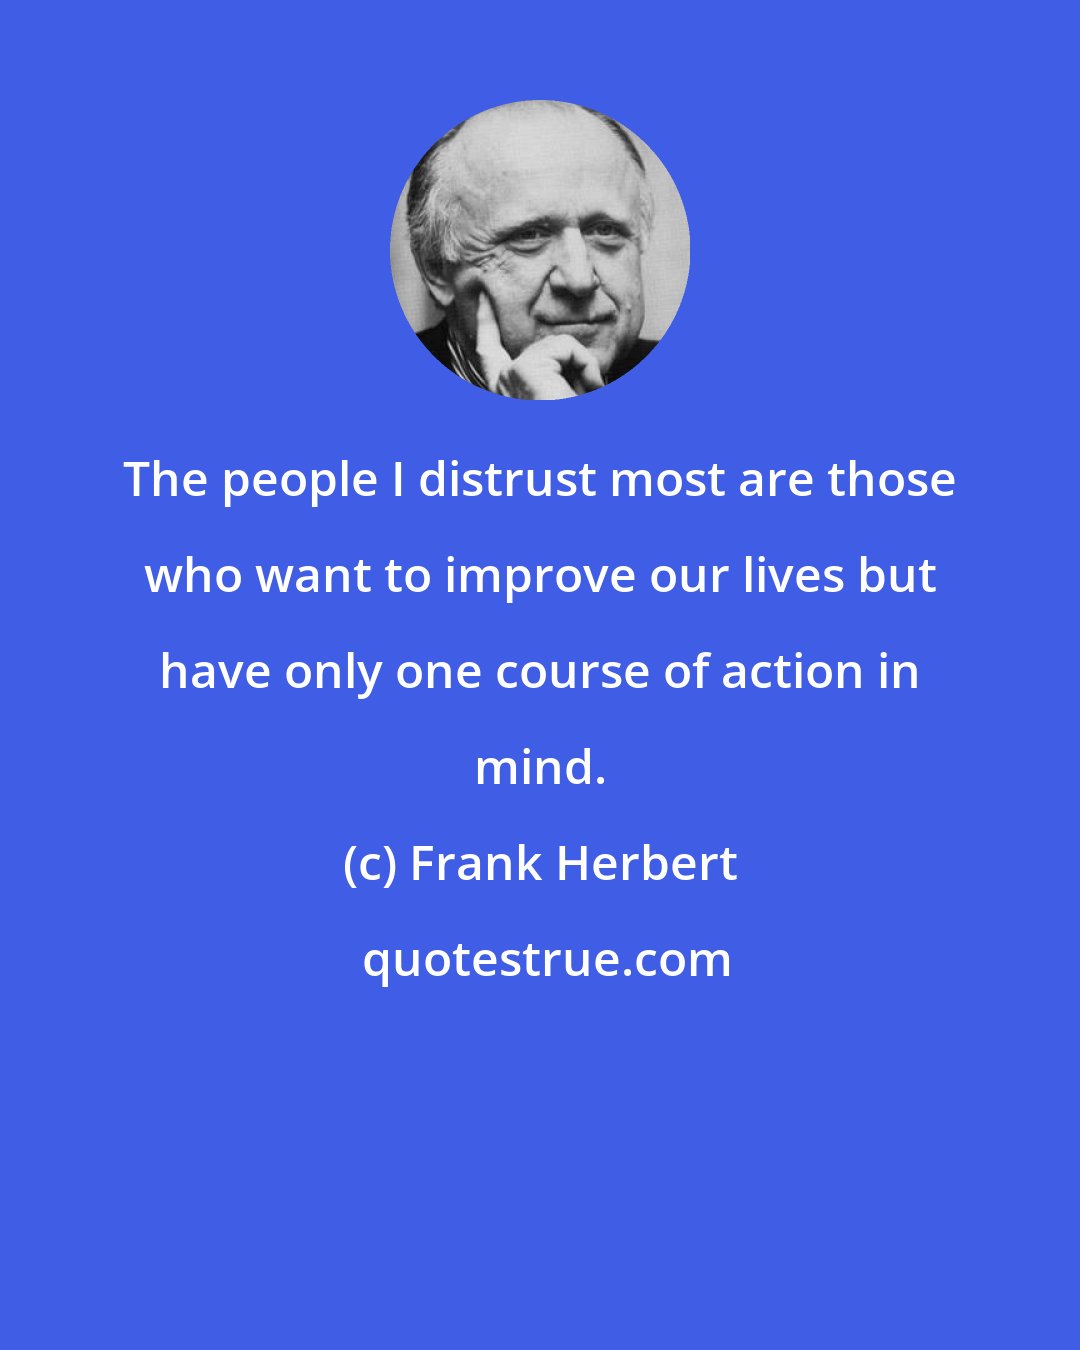 Frank Herbert: The people I distrust most are those who want to improve our lives but have only one course of action in mind.